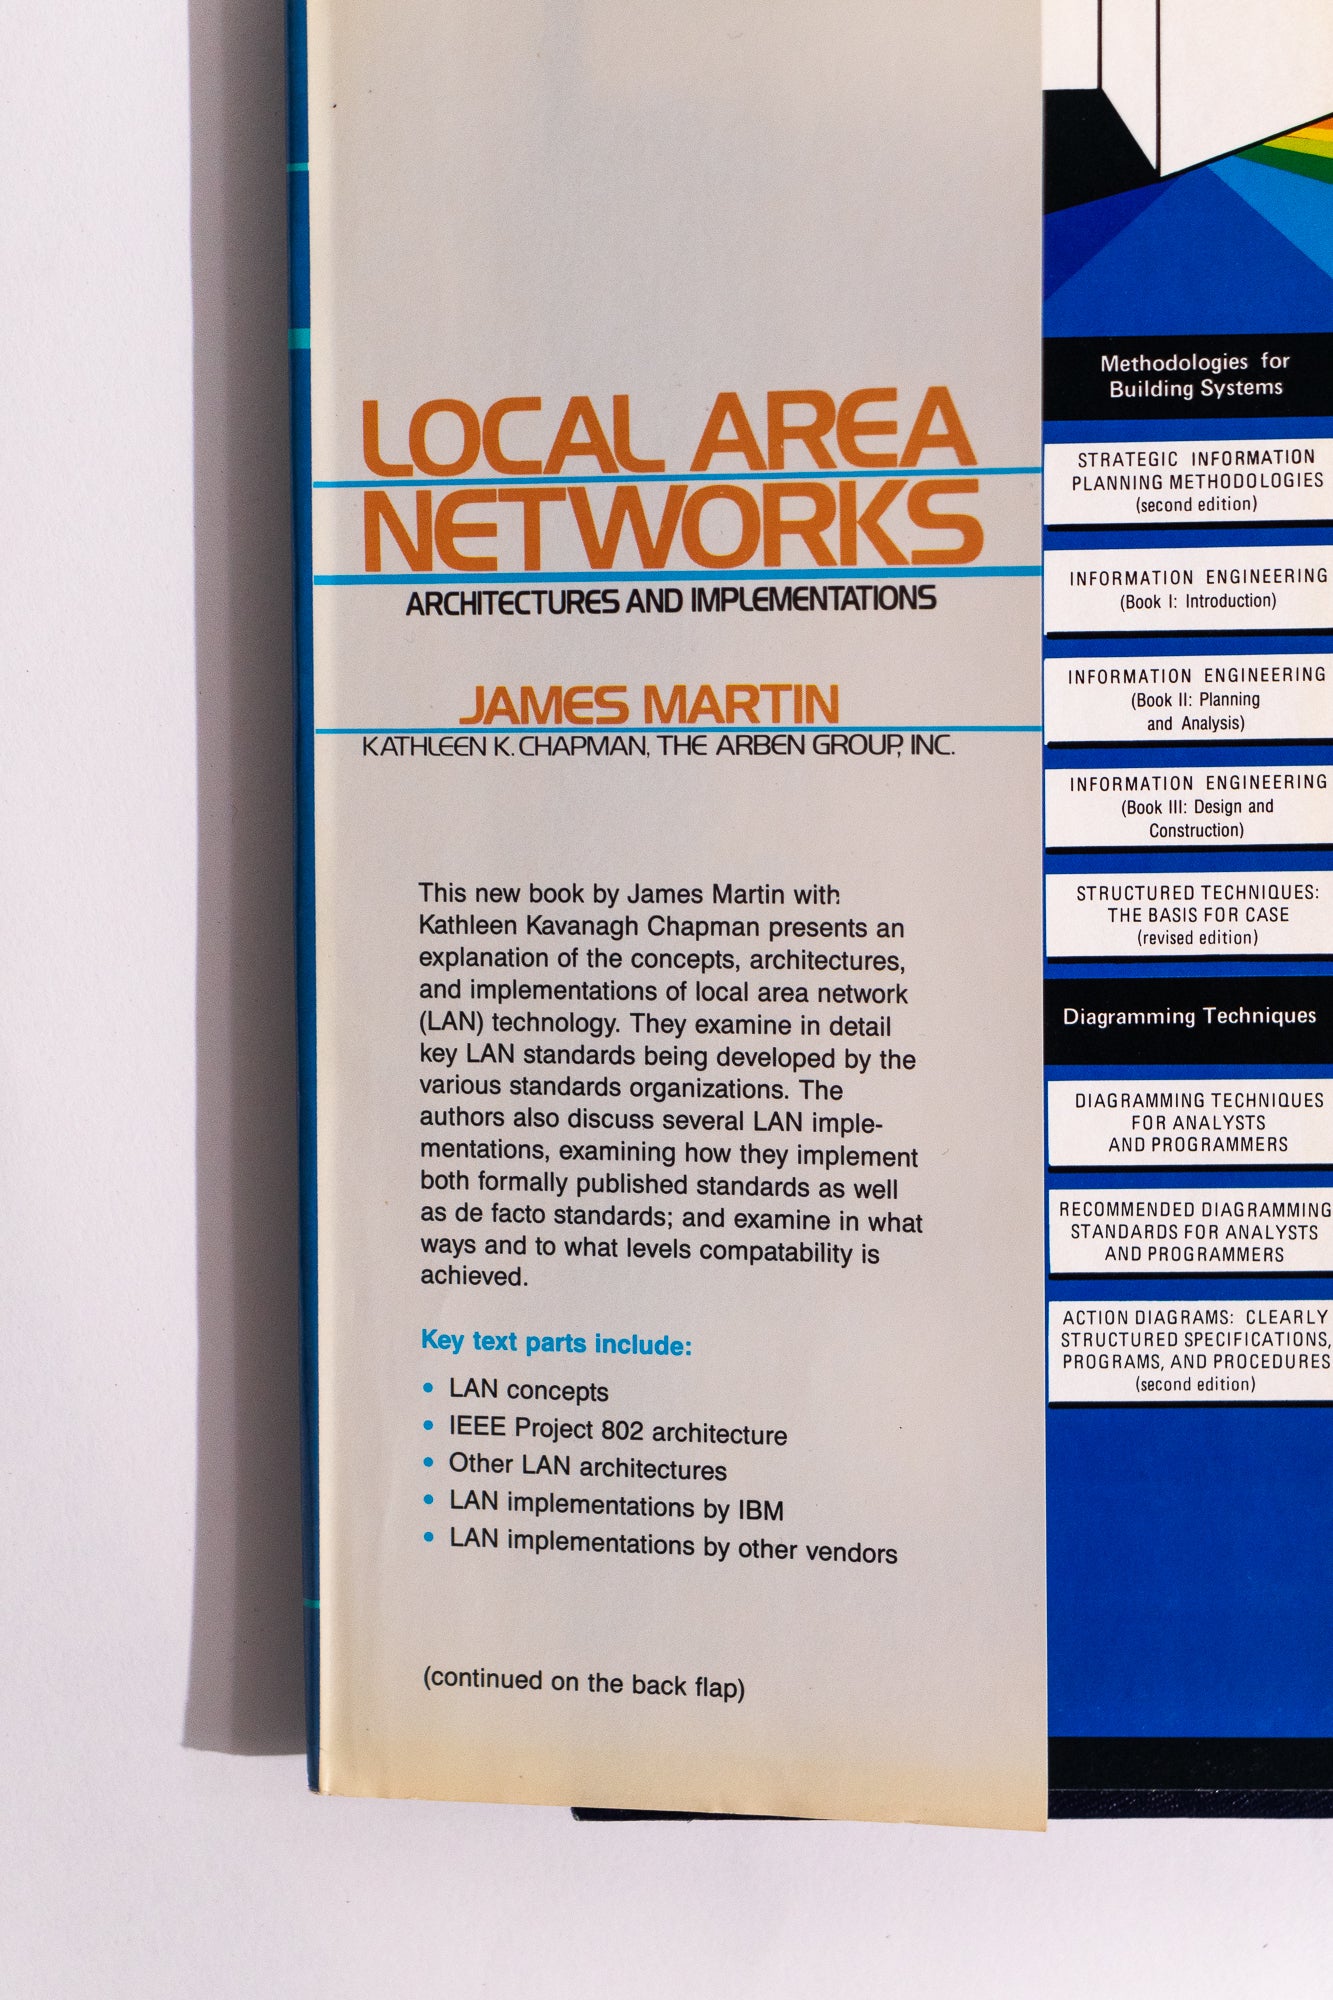 Local Area Networks: Architecture and Implementations - Stemcell Science Shop